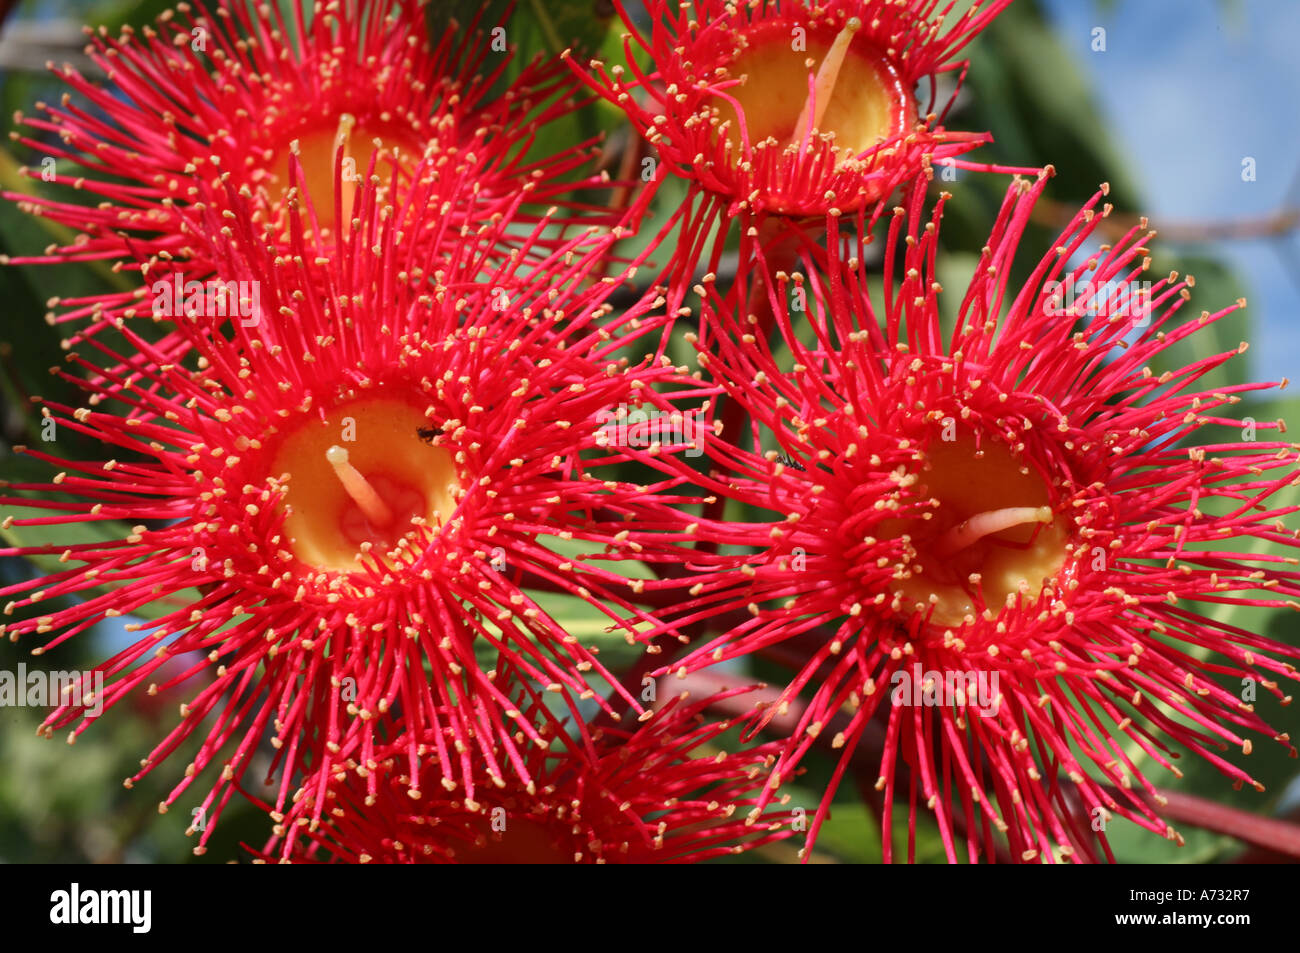 Red Eucalypt or gum tree blossoms Stock Photo